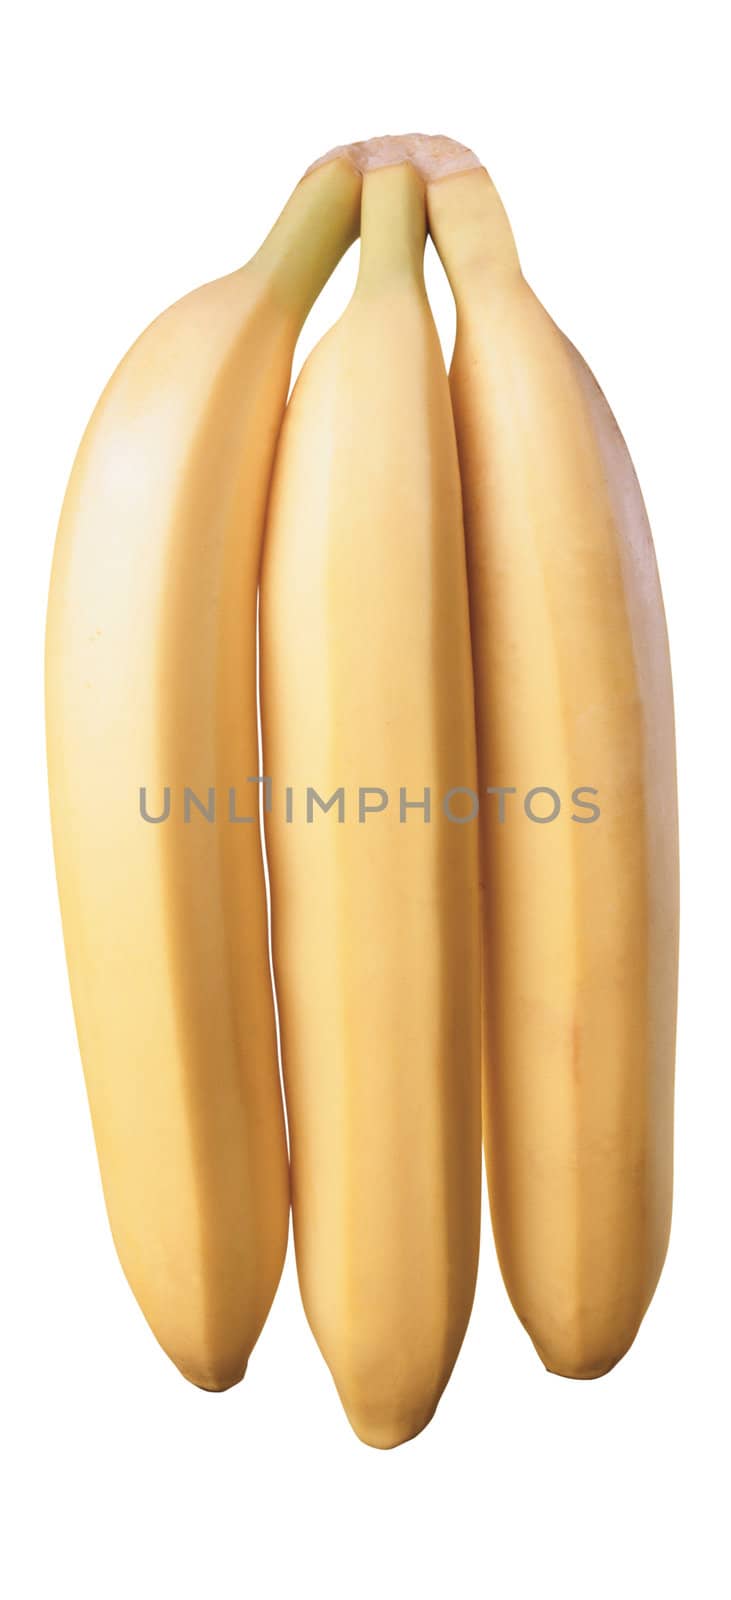 Three bananas, isolated on a white background